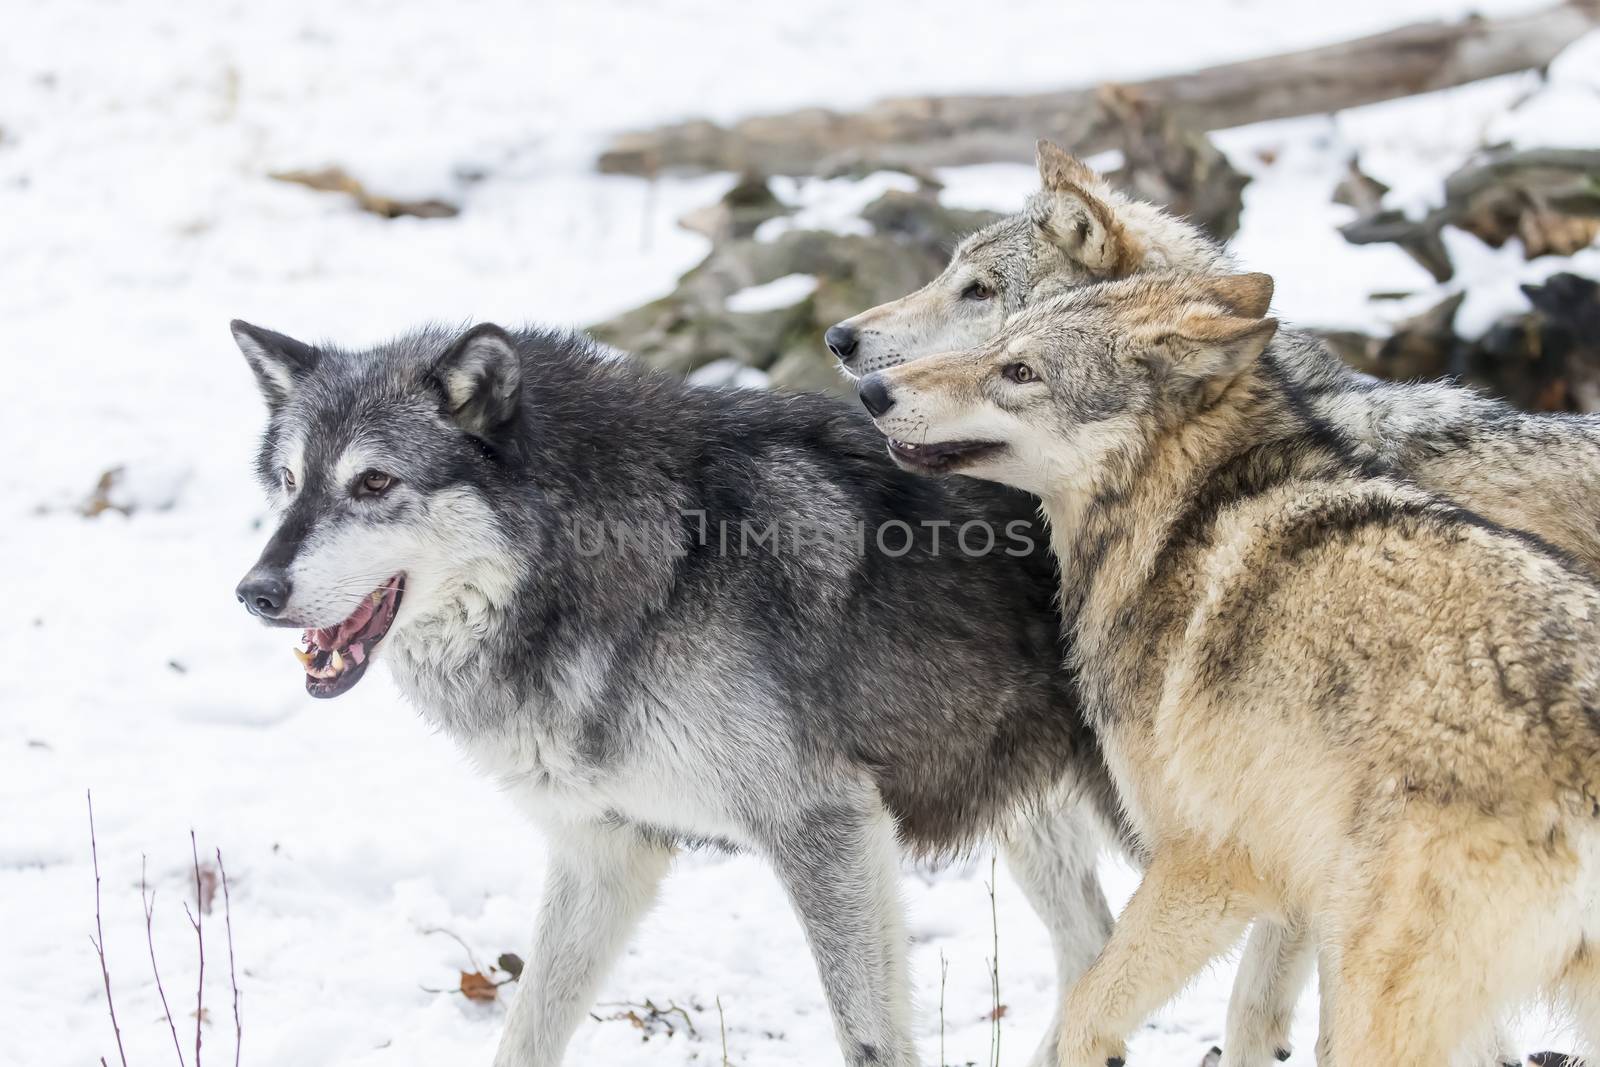 A pack of Tundra Wolves in a snowy Forest hunting for prey.